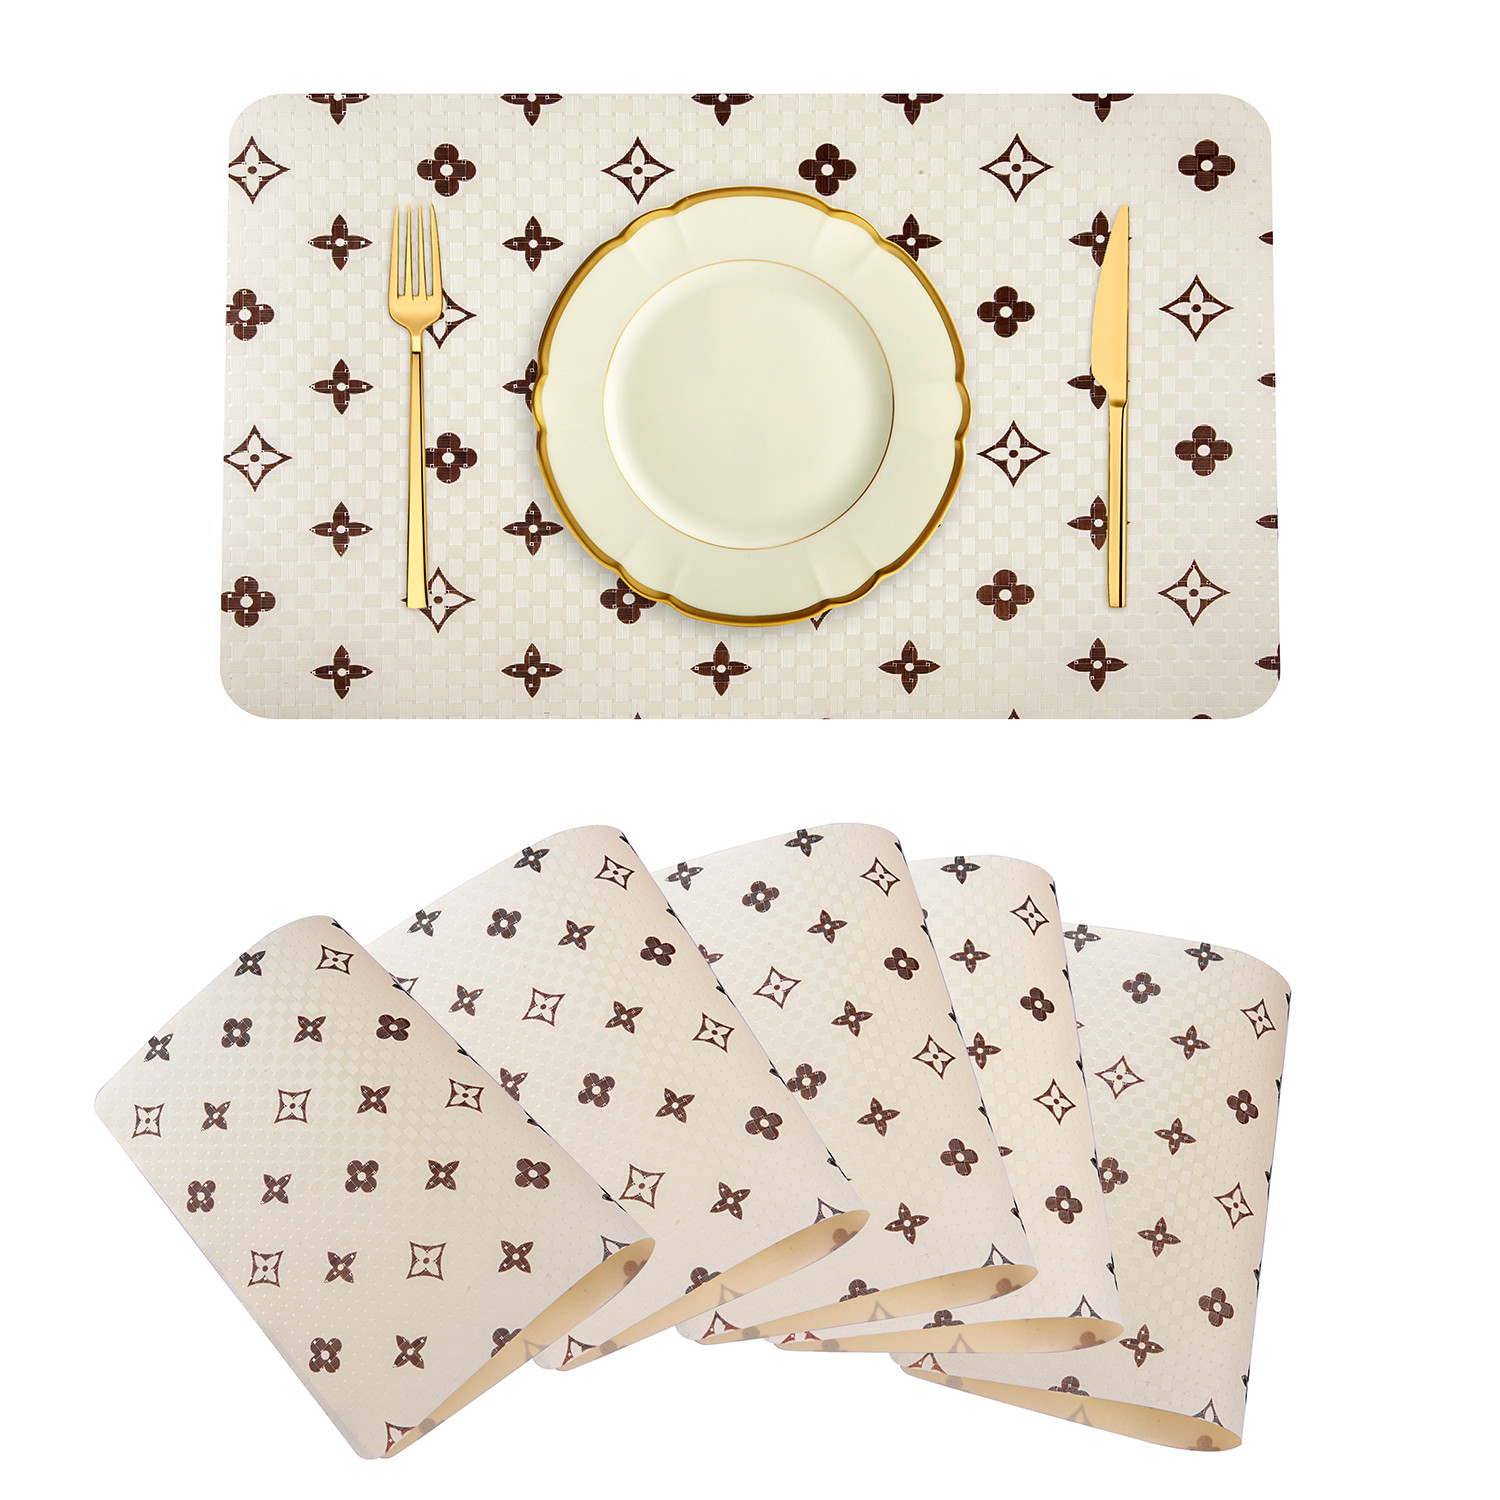 Kuber Industries Placemat | Placemats for Dining Room | Anti-Slip Table Mat Set | Placemats for Kitchen Table | Dining Table Placemats | Brown Star-Design Placemat | 6 Piece Set | Cream